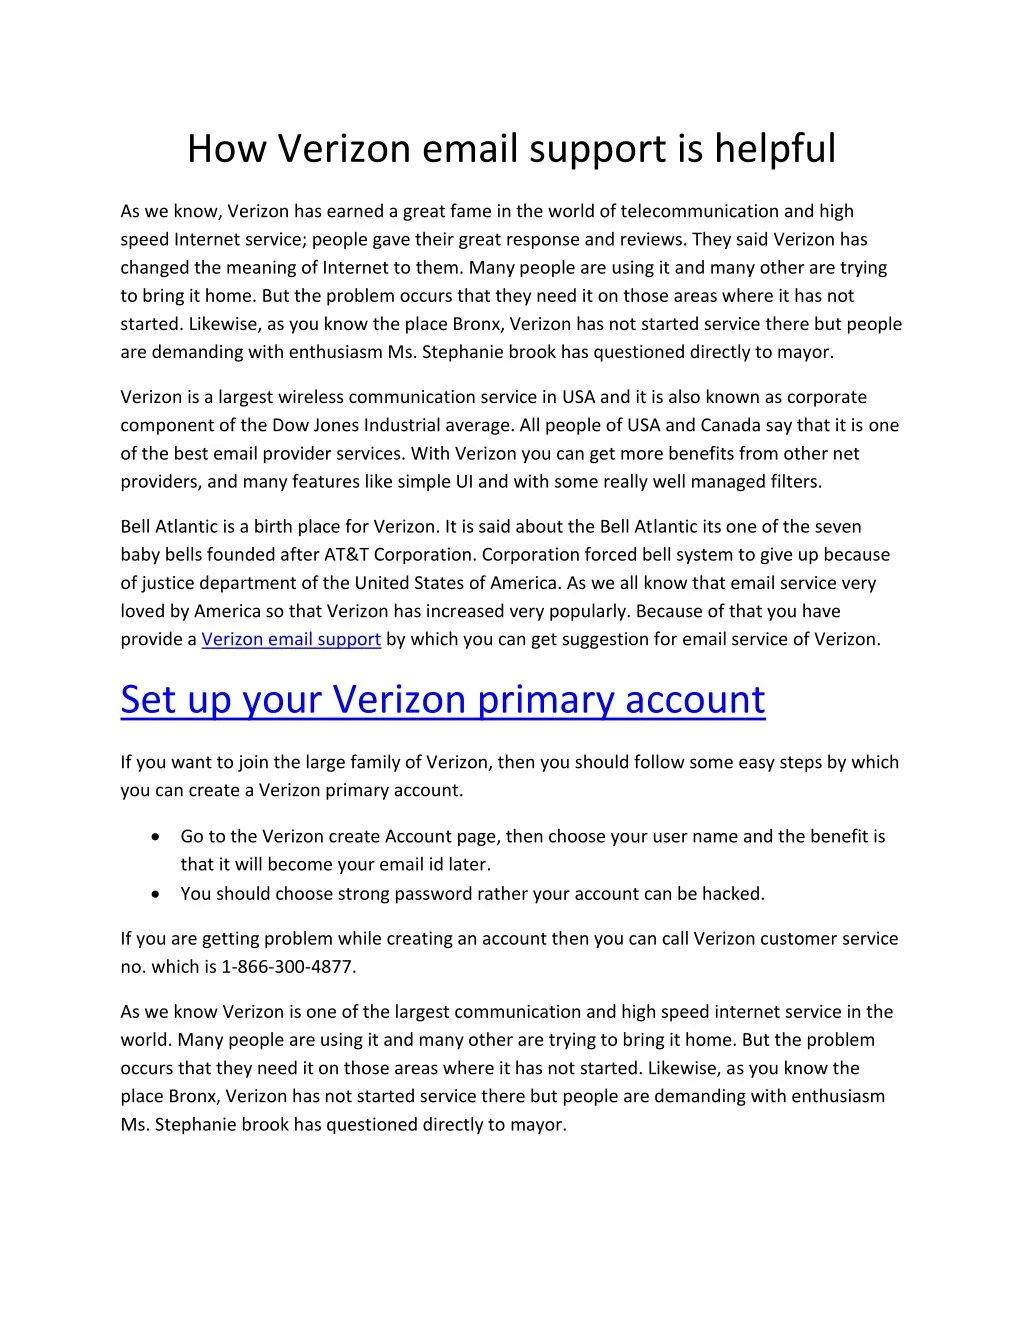 how verizon email support is helpful